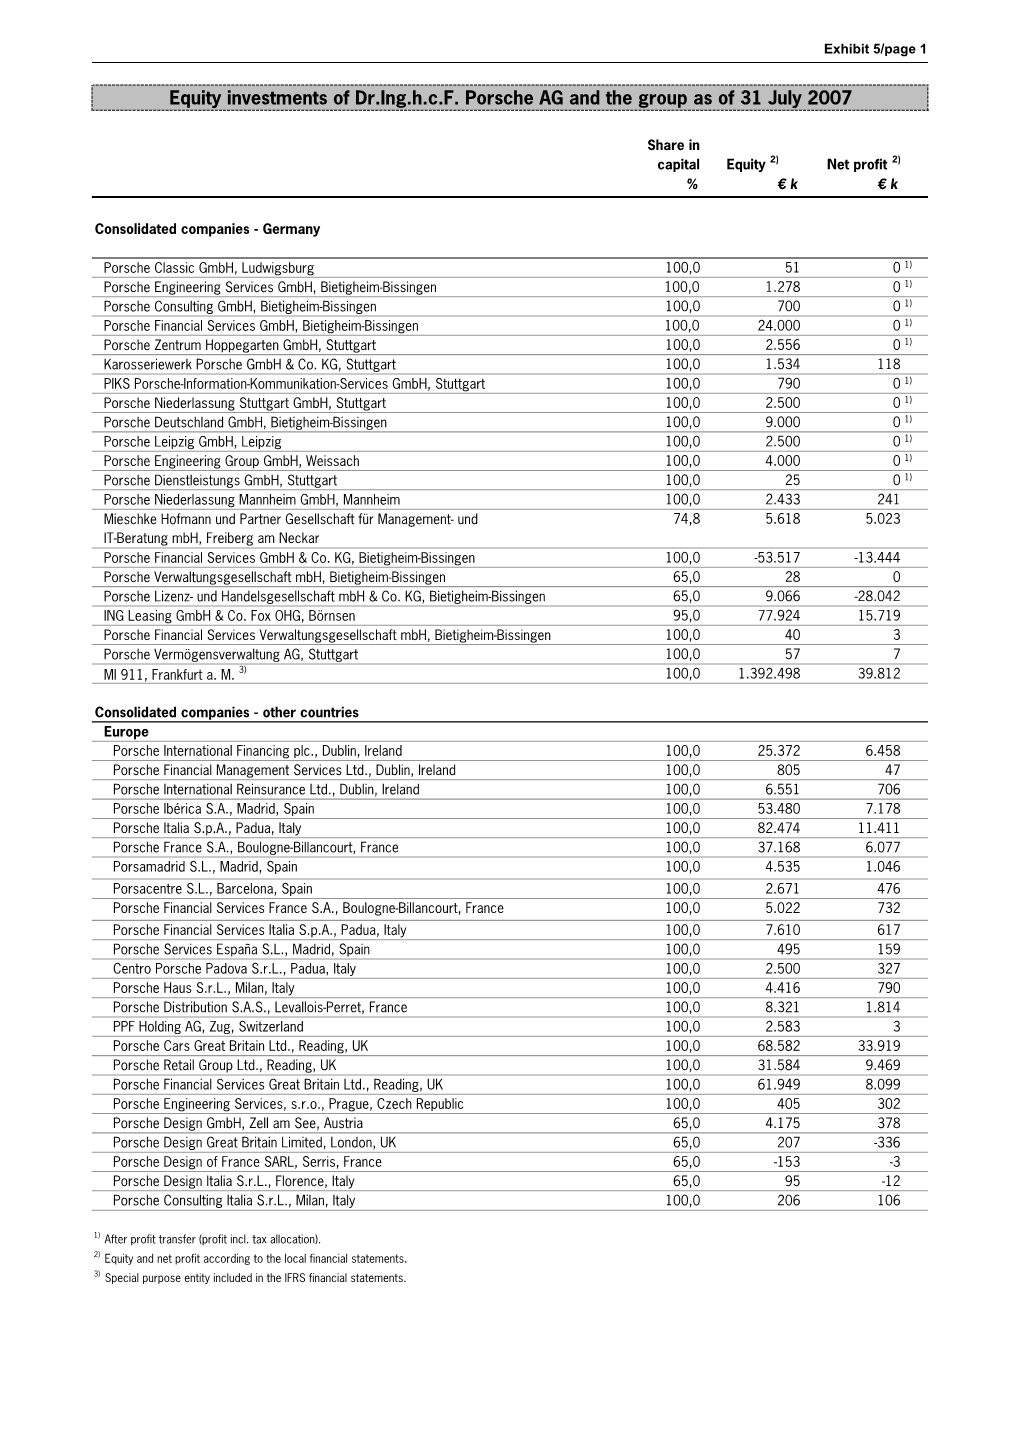 List of Equity Investments As of 31 July 2007 (Former Dr. Ing. H.C. F. Porsche AG